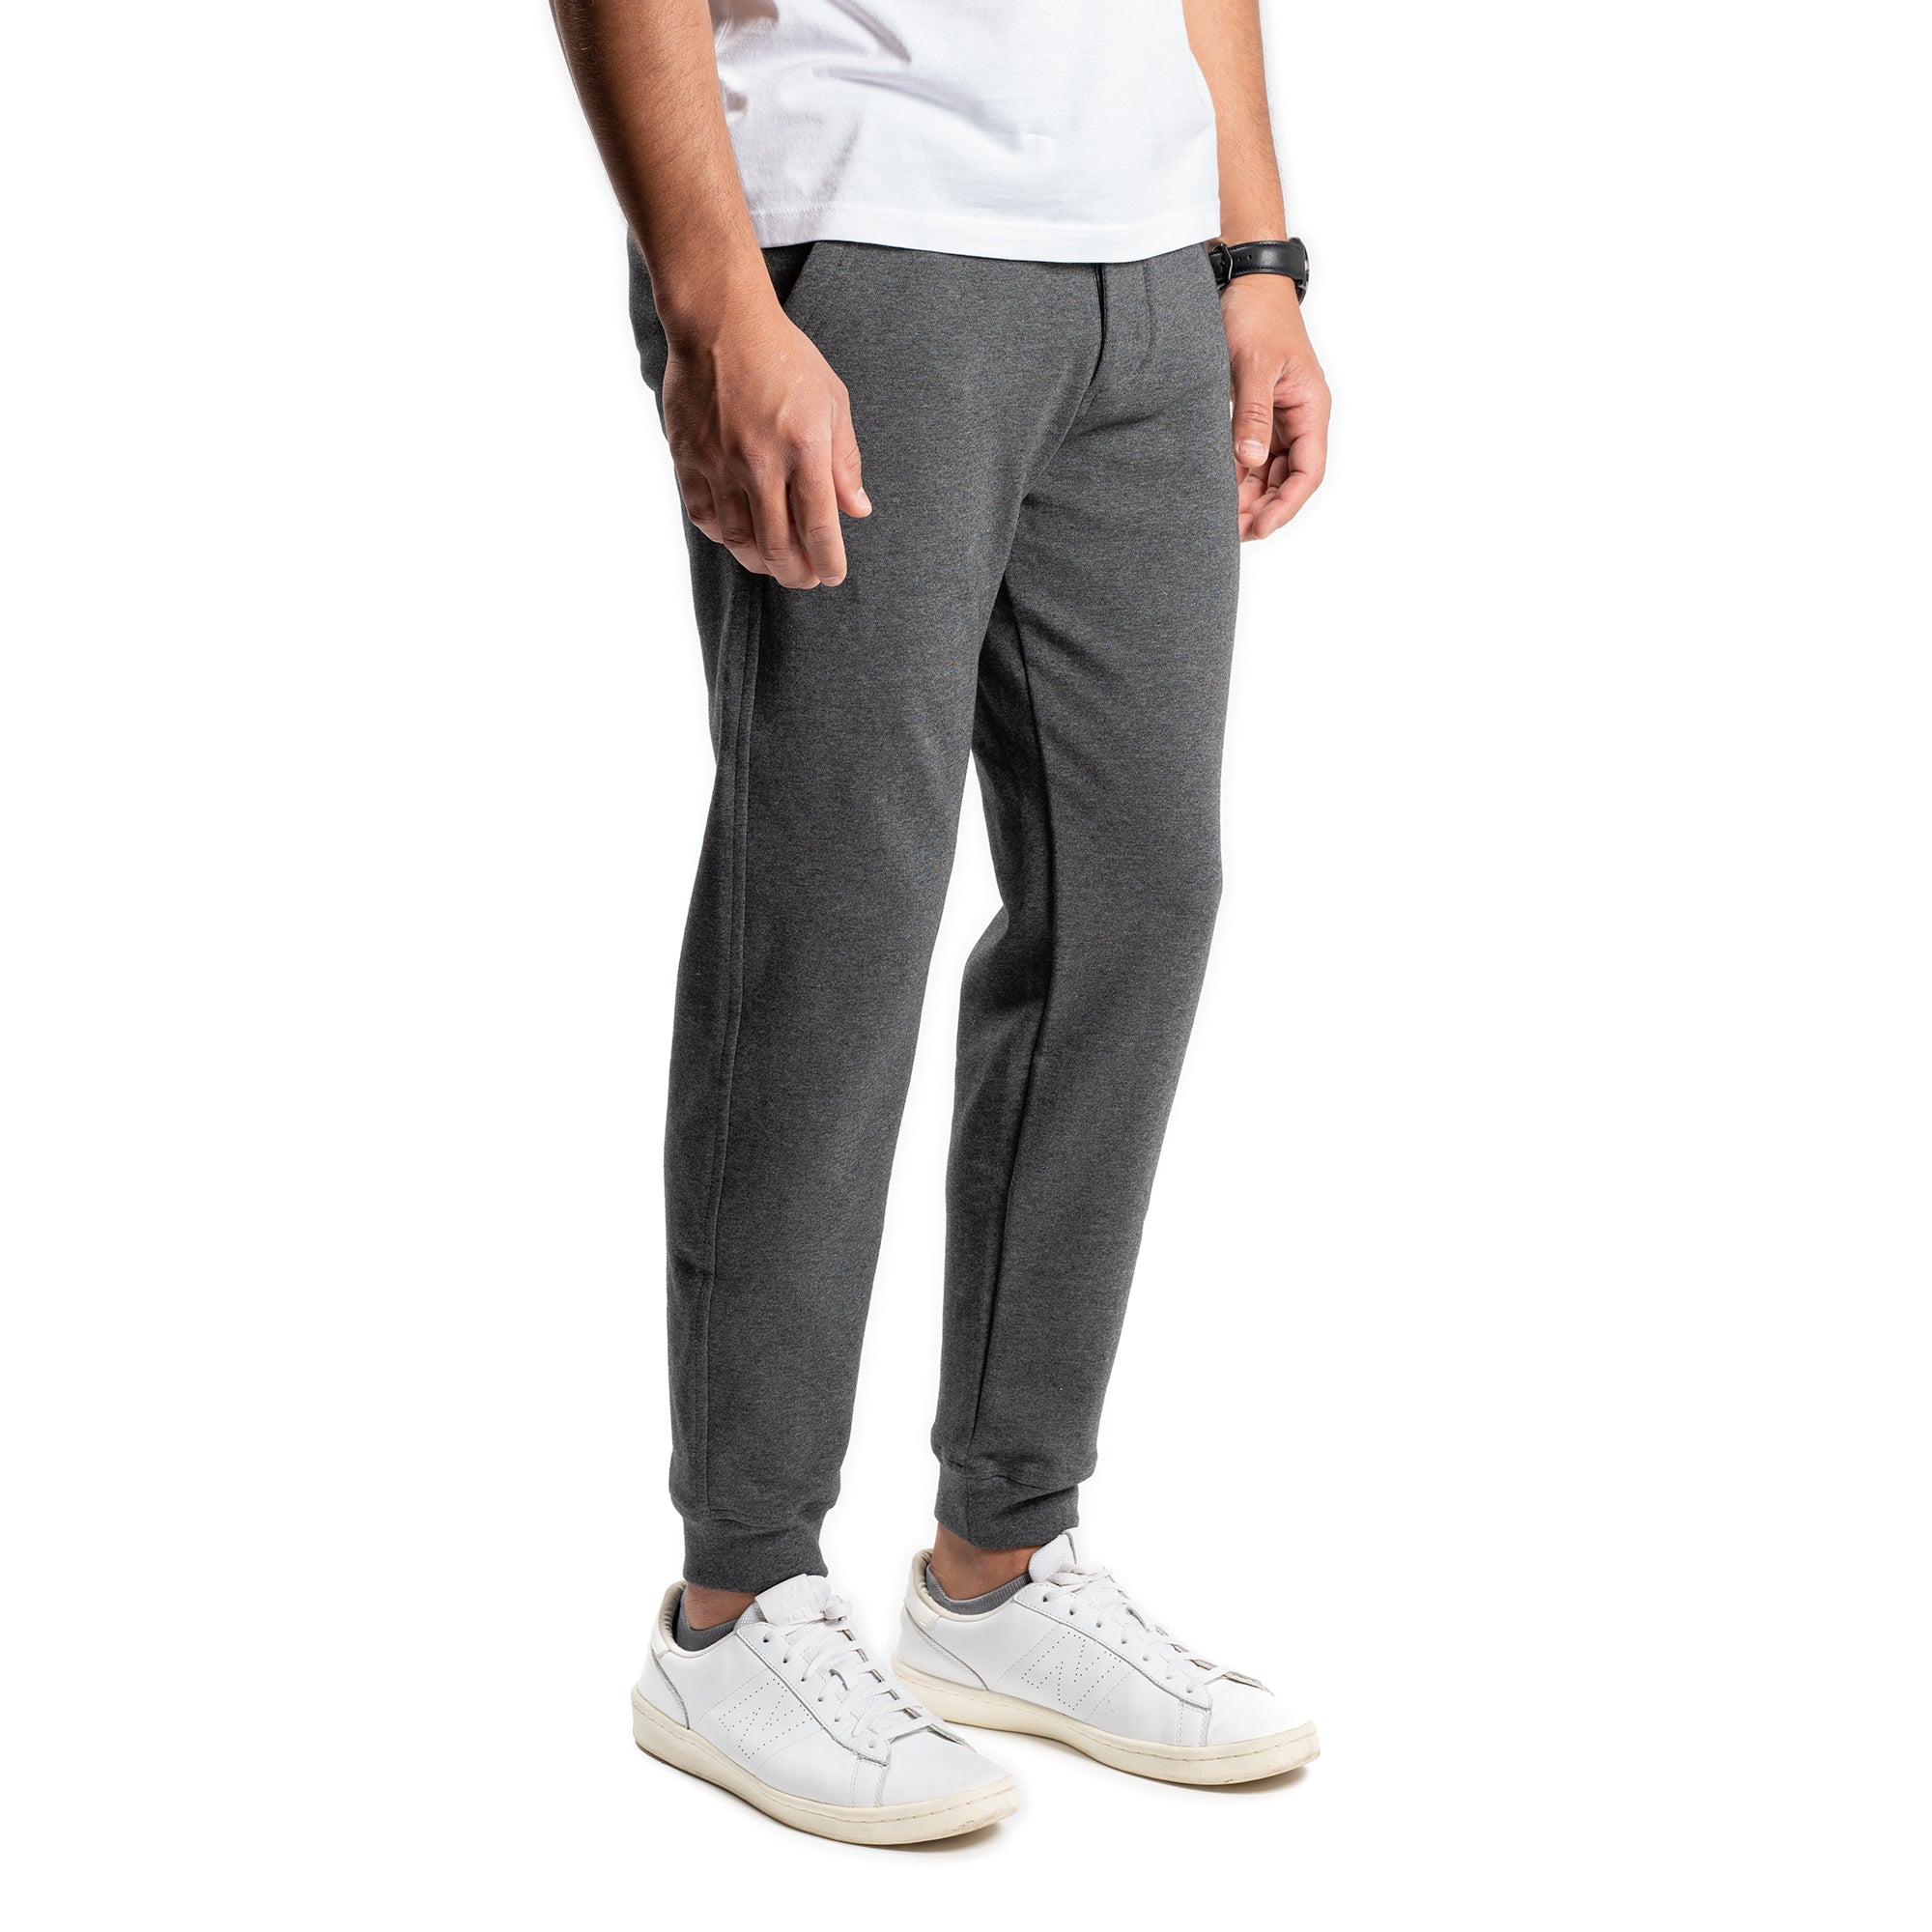 All Day Sweatpants - Charcoal